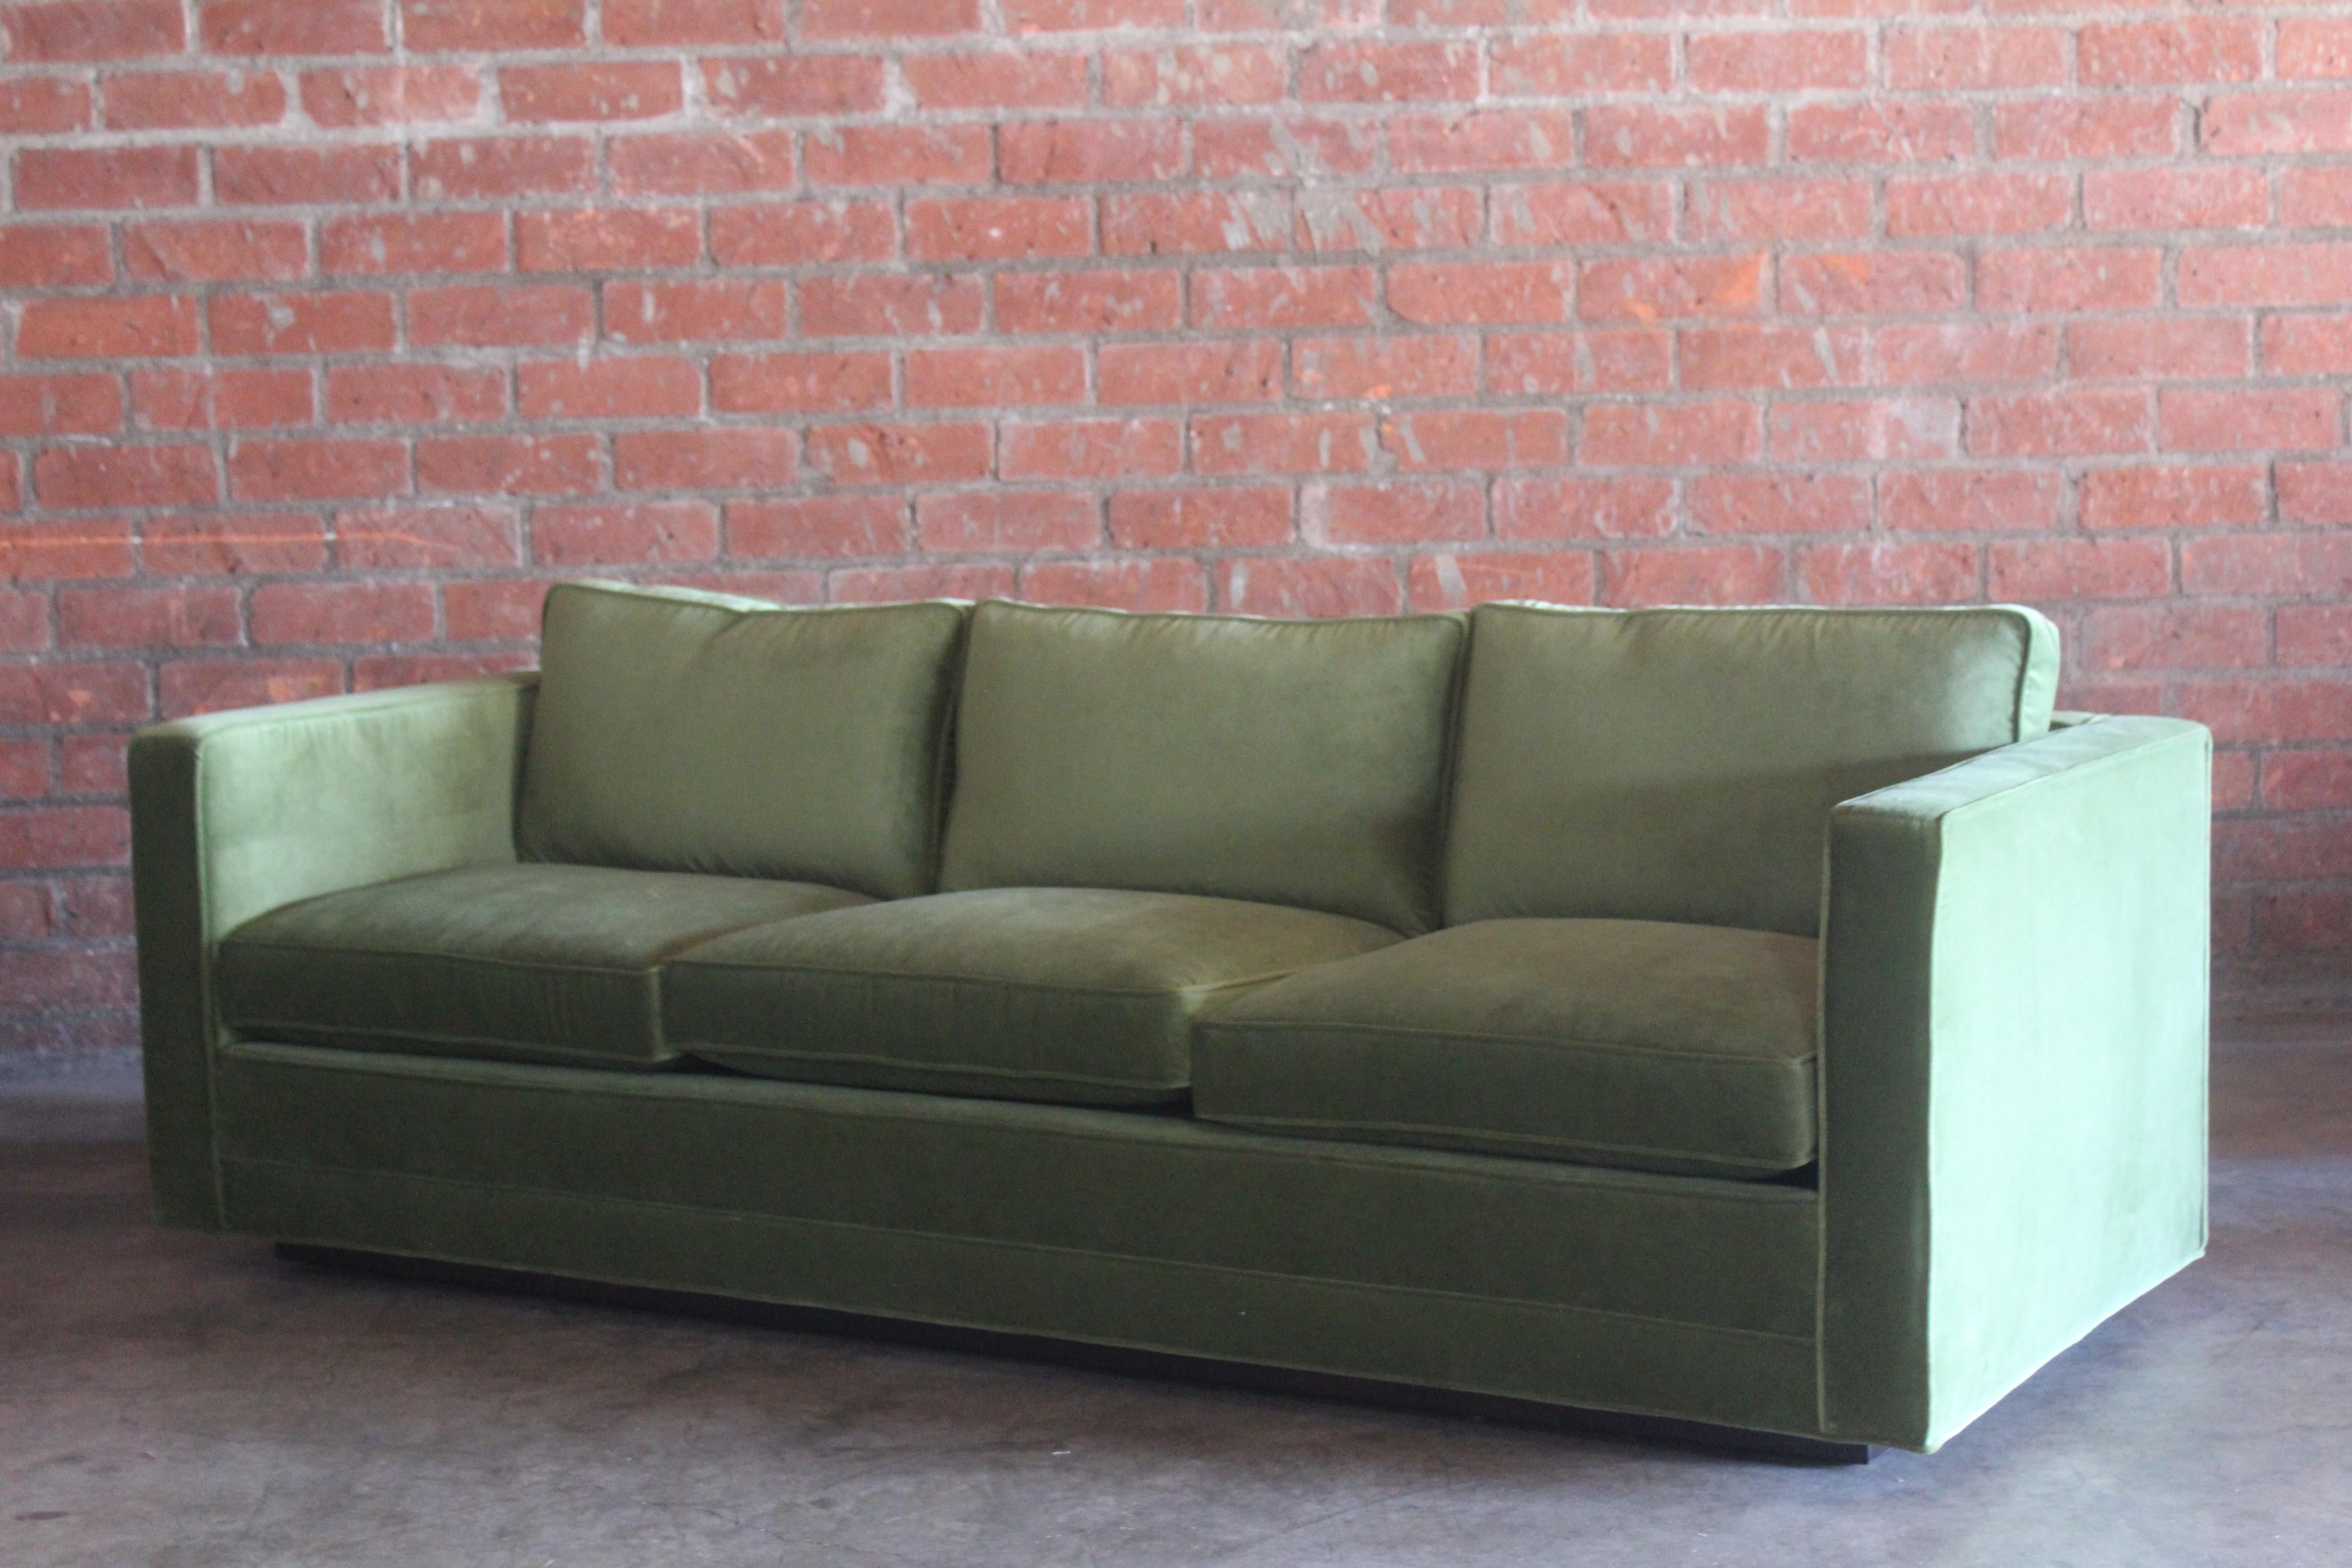 Tuxedo Sofa by Edward Wormley for Dunbar, 1950s. Pair Available, Sold Separately 1